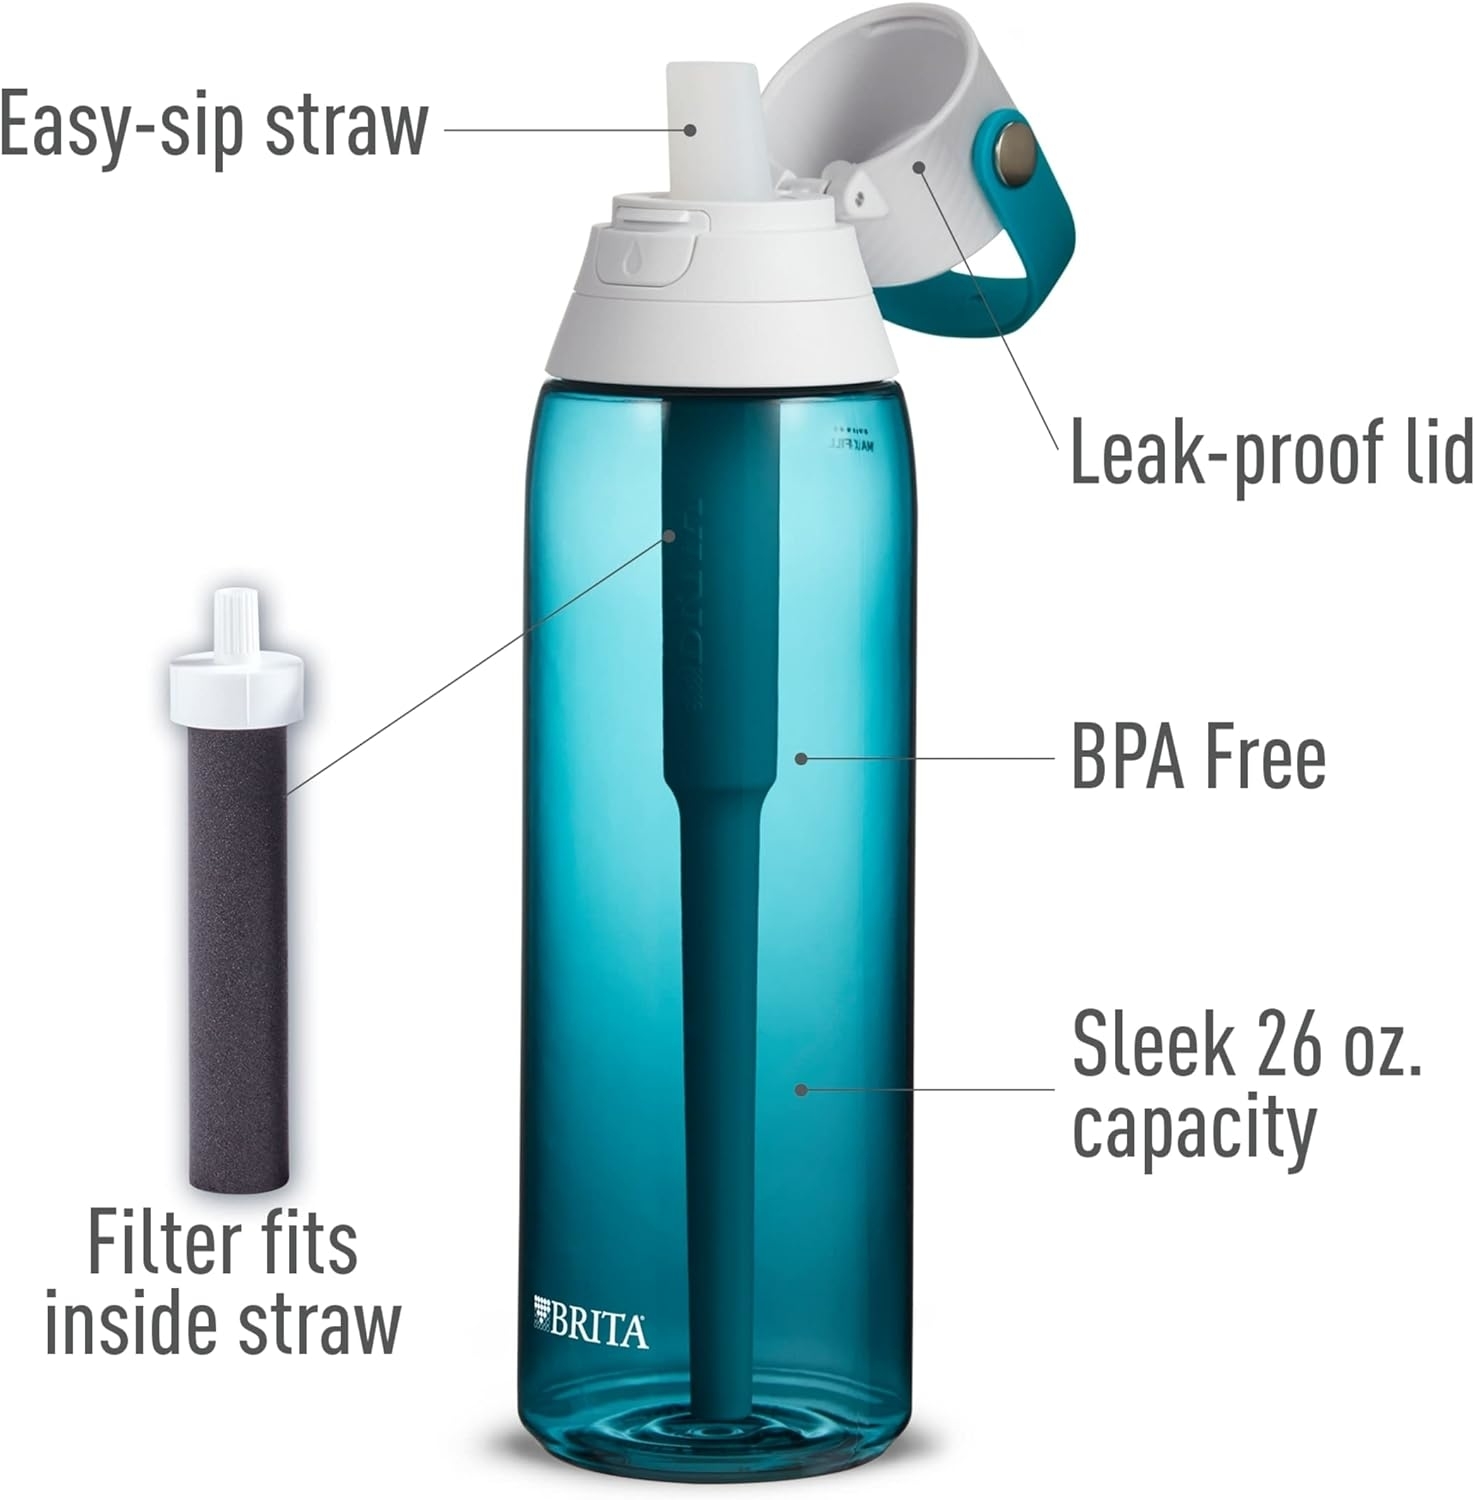 blue transparent water bottle with easy-sip straw, leak-proof lid, and a filter that fits inside the straw